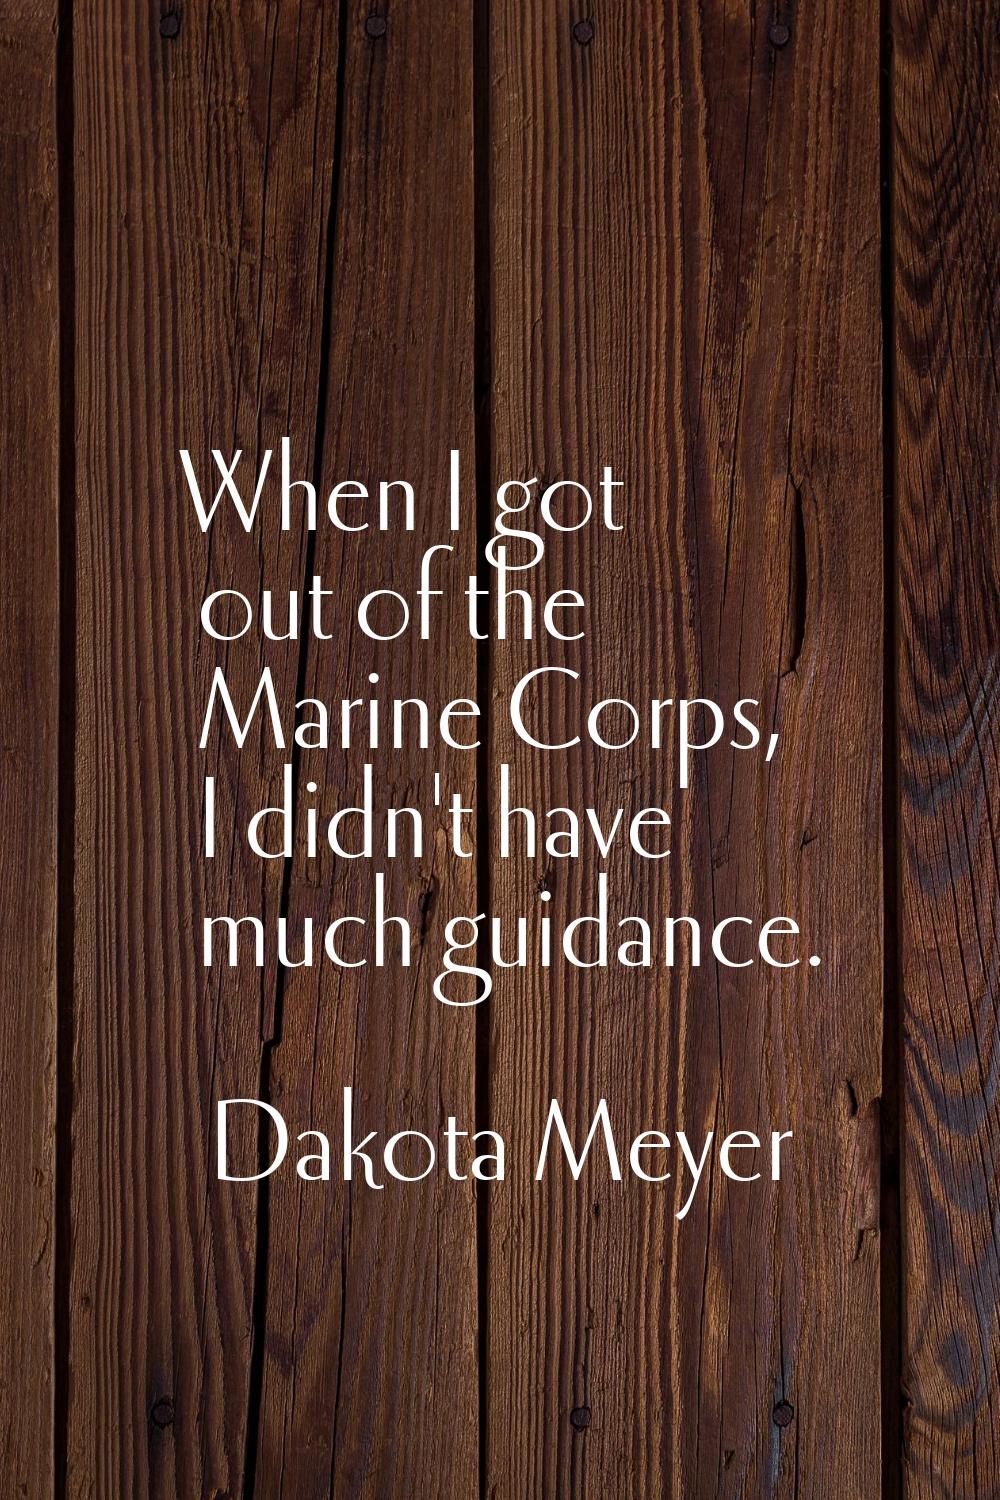 When I got out of the Marine Corps, I didn't have much guidance.